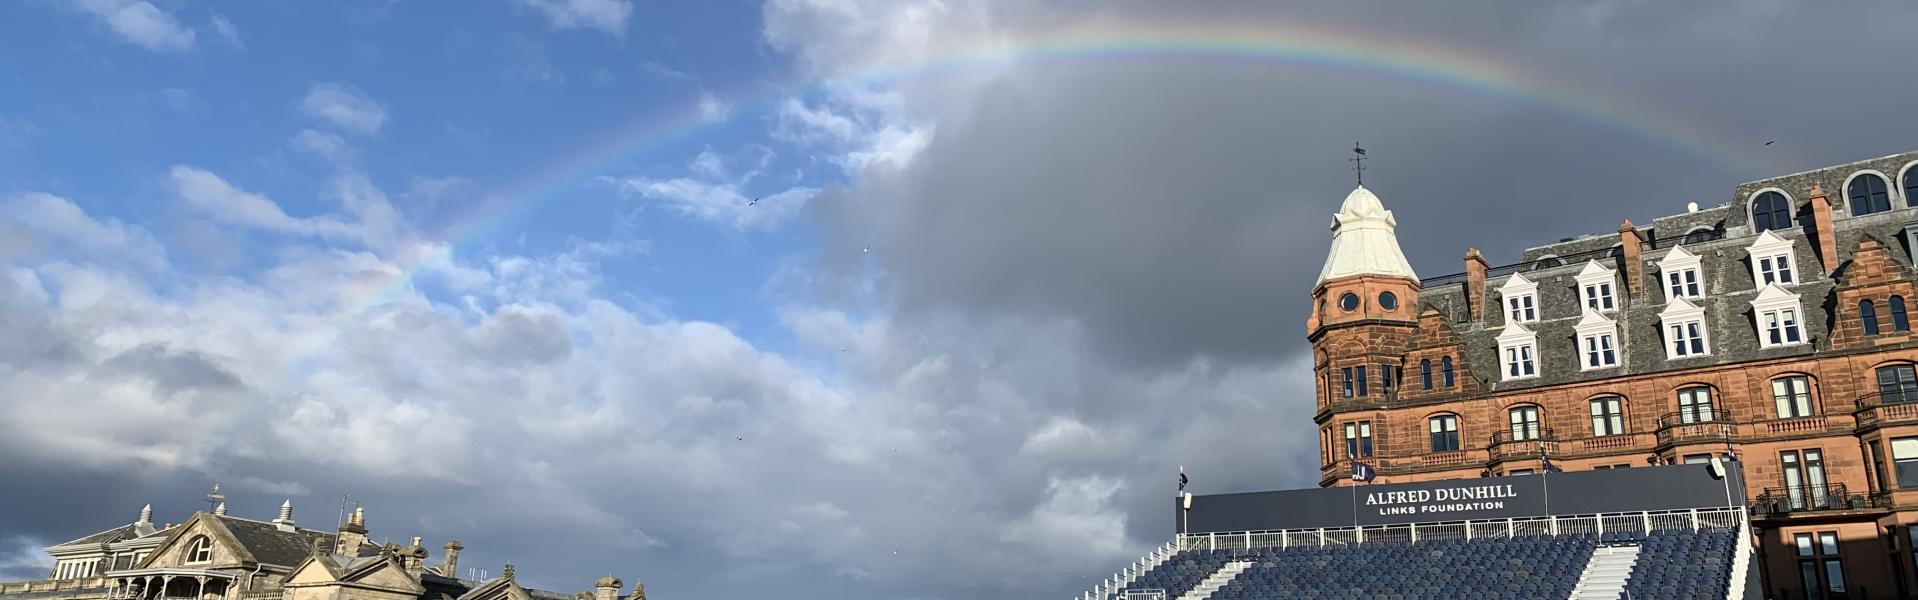 A rainbow over the world's oldest golf course, AKA "Old Course," during a European golf championship on one of my first weekends at St Andrews (photo: Imogen Crawford)